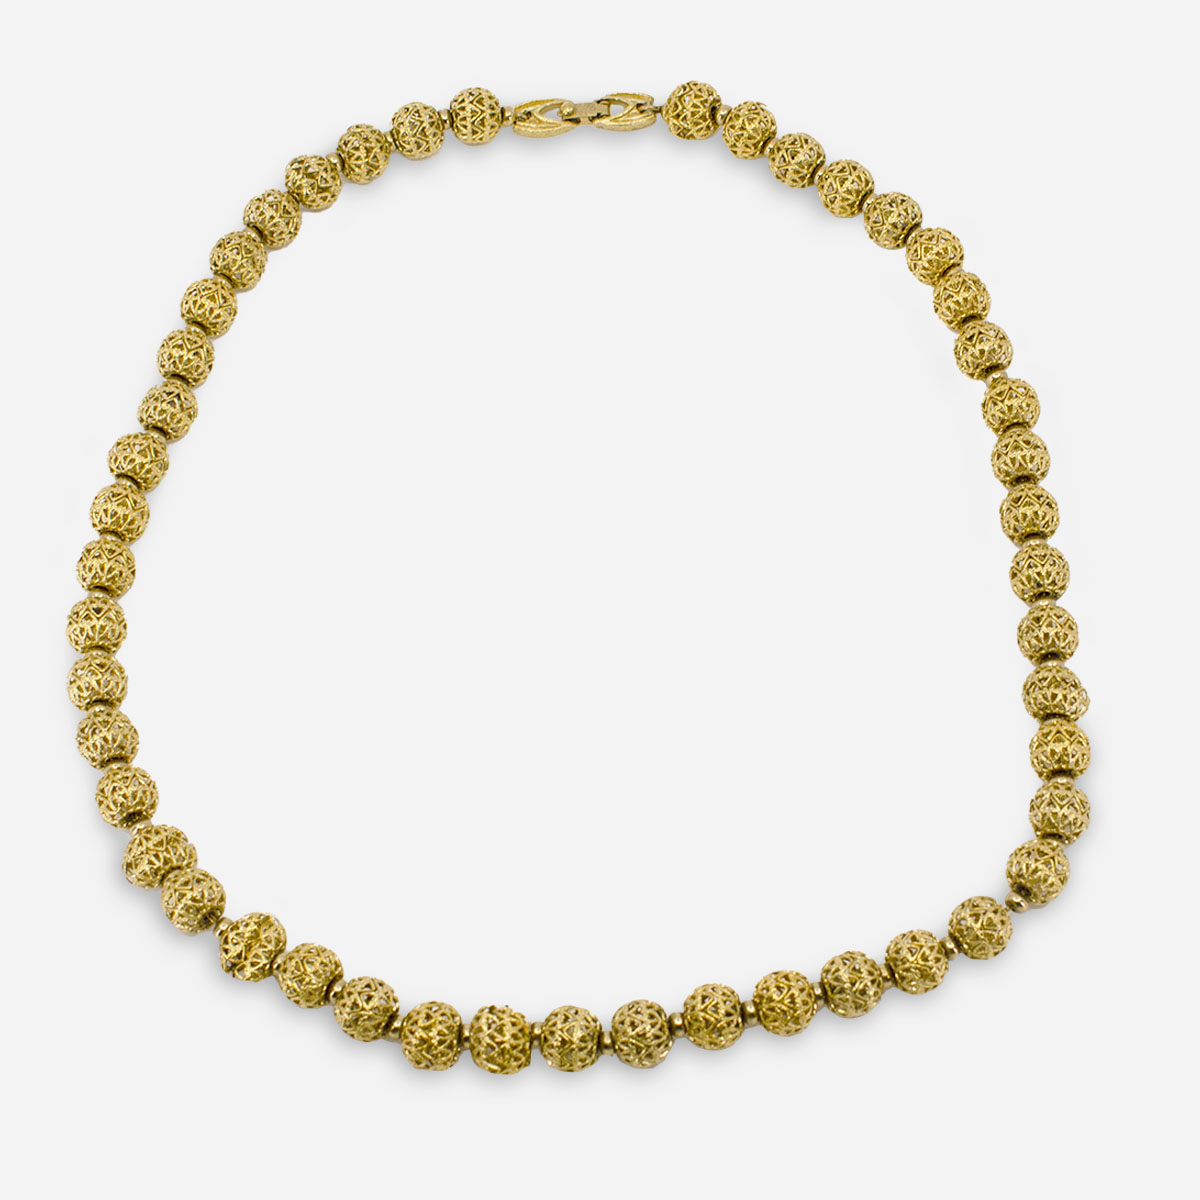 Gold filigree beaded necklace by monet